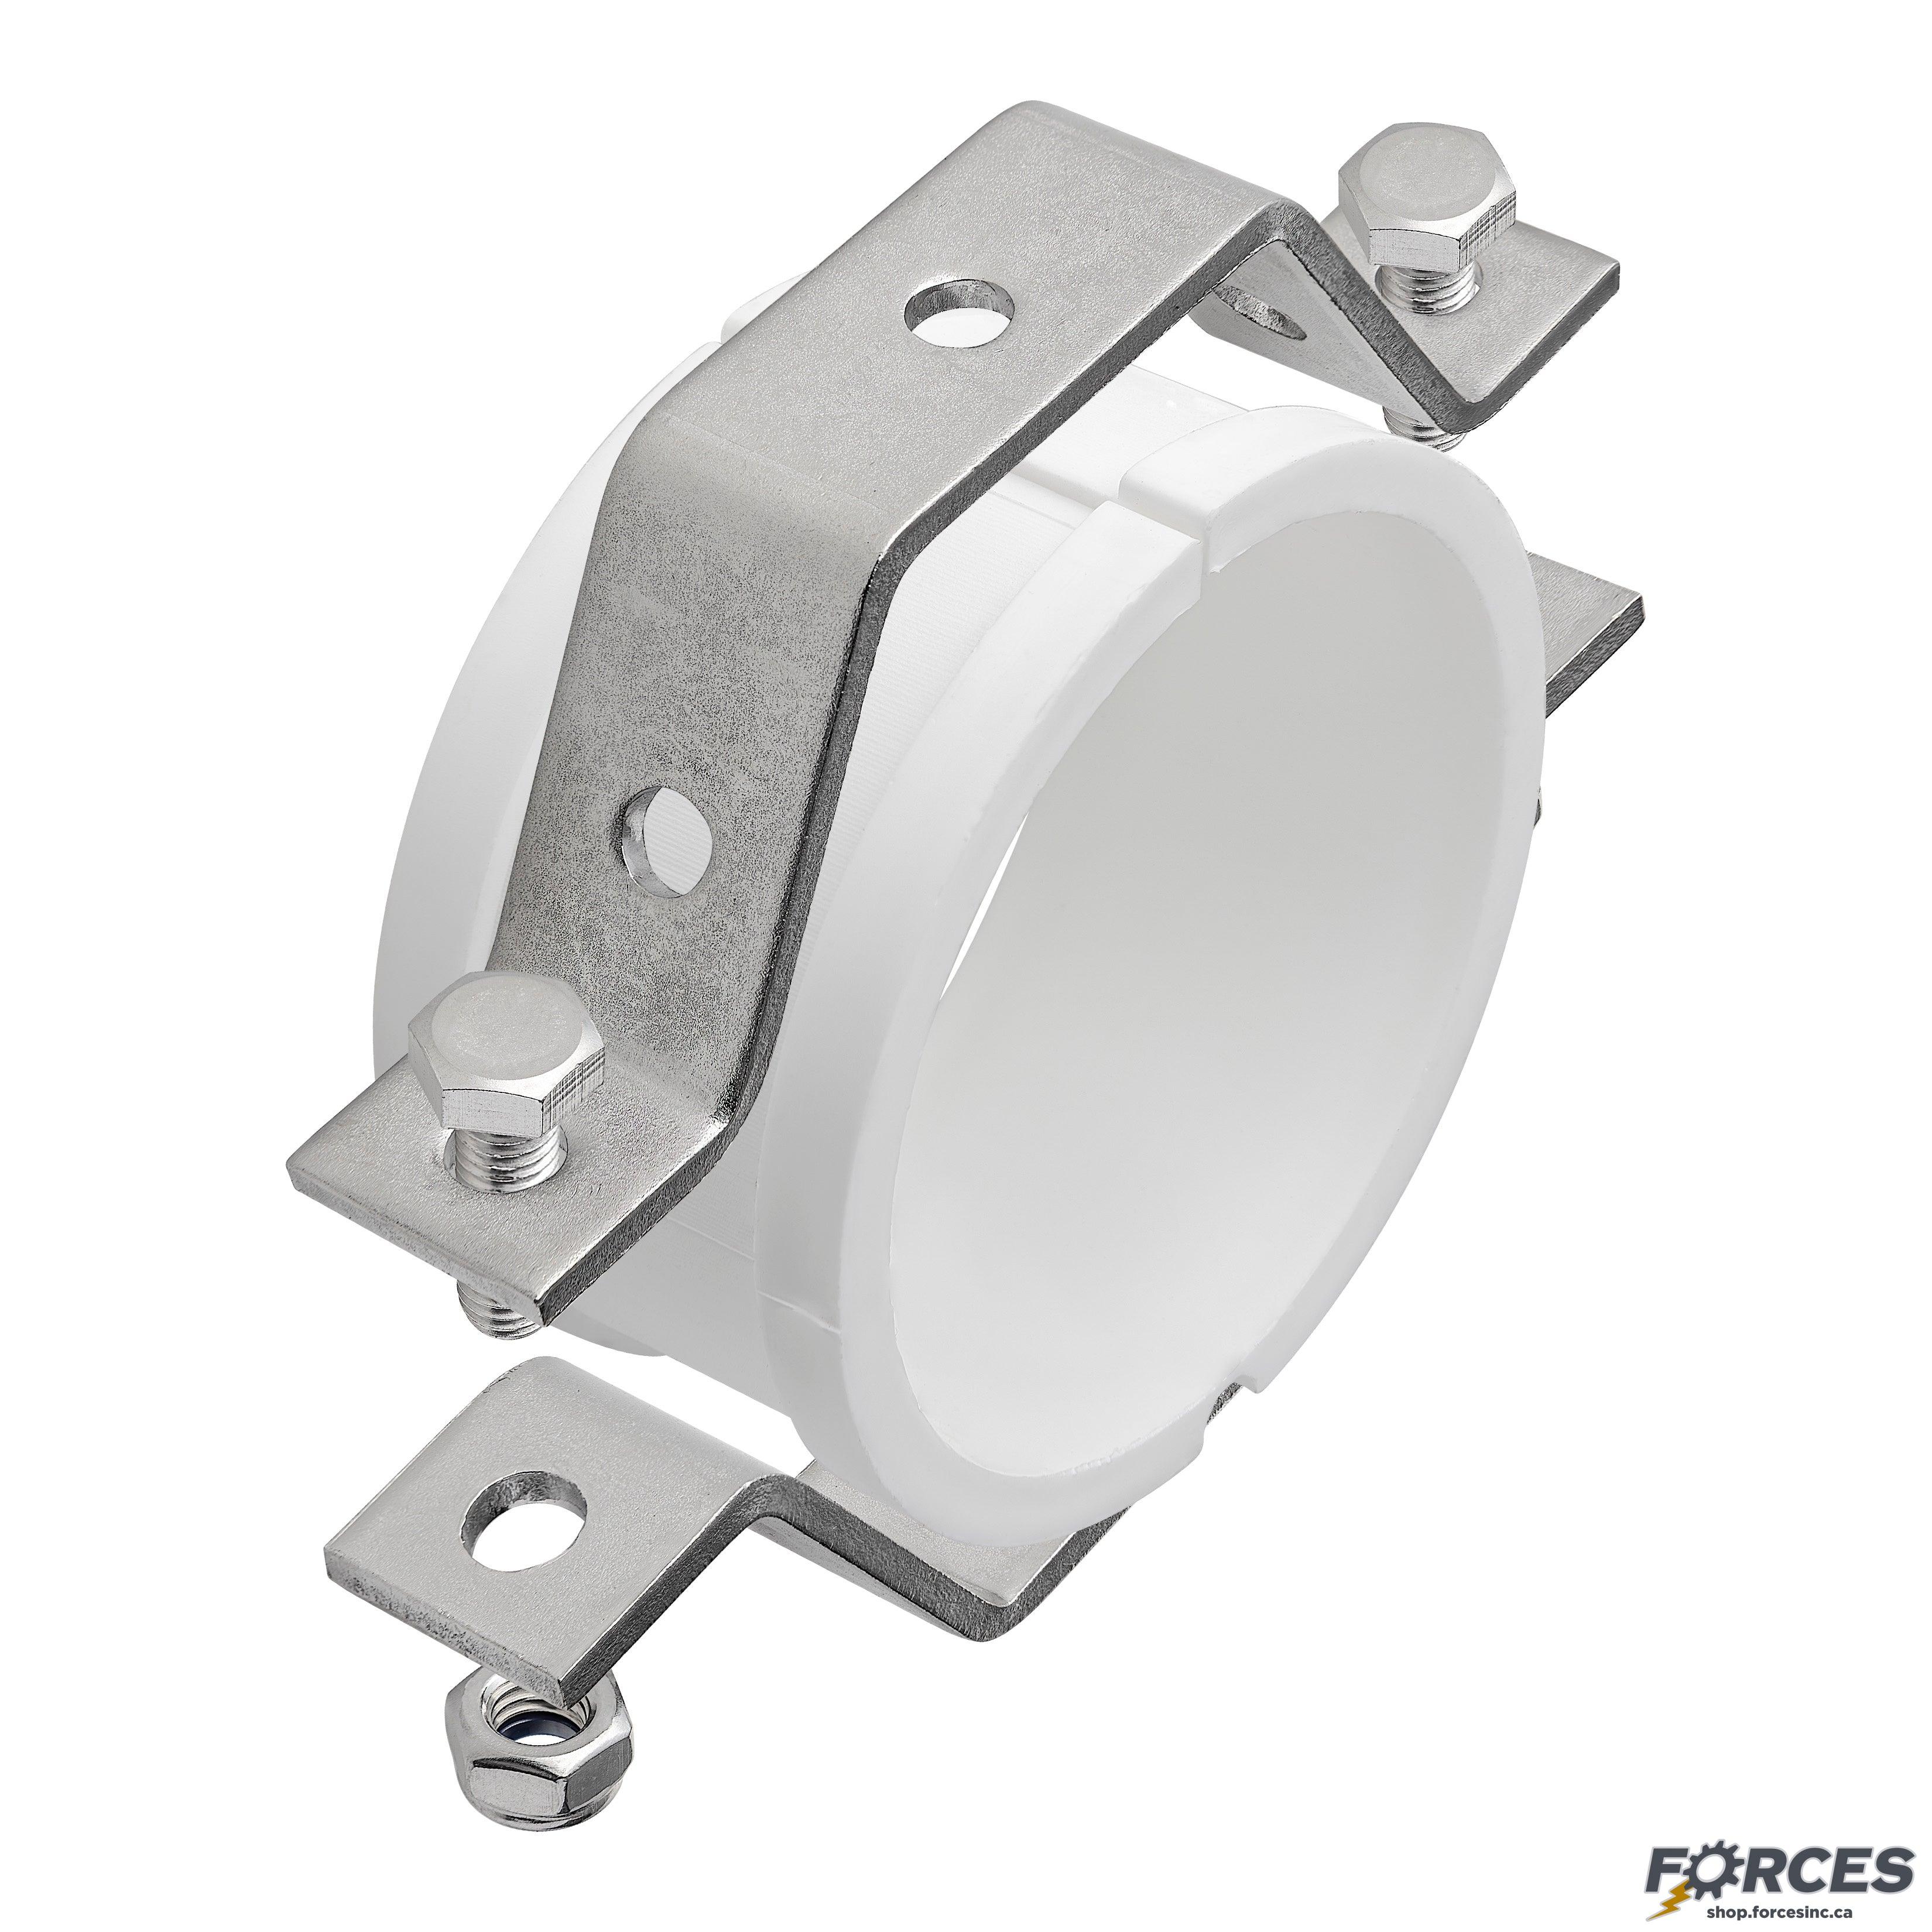 8" Hanger for Sanitary Tube With PVC Insert 304 Stainless Steel - Forces Inc